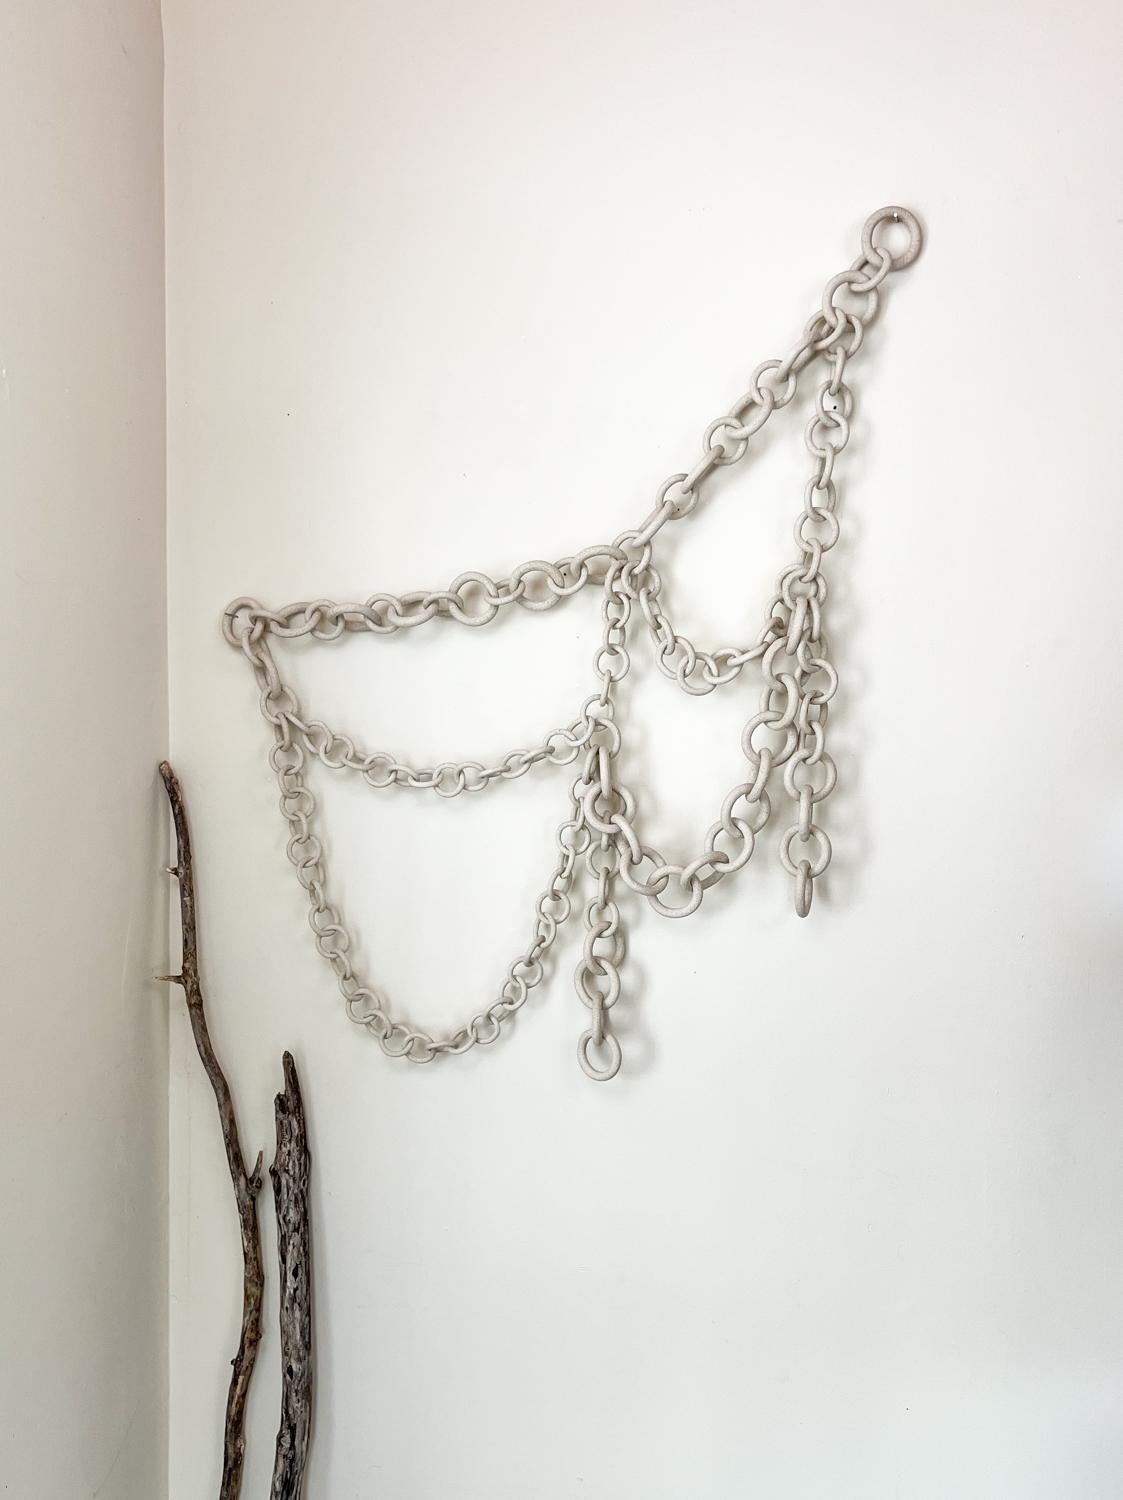 This Ceramic Chain wall sculpture is a unique and captivating piece of art that adds a touch of elegance and intrigue to any space. The sculpture is meticulously crafted by the Artist who skillfully shapes and connects individual ceramic links to